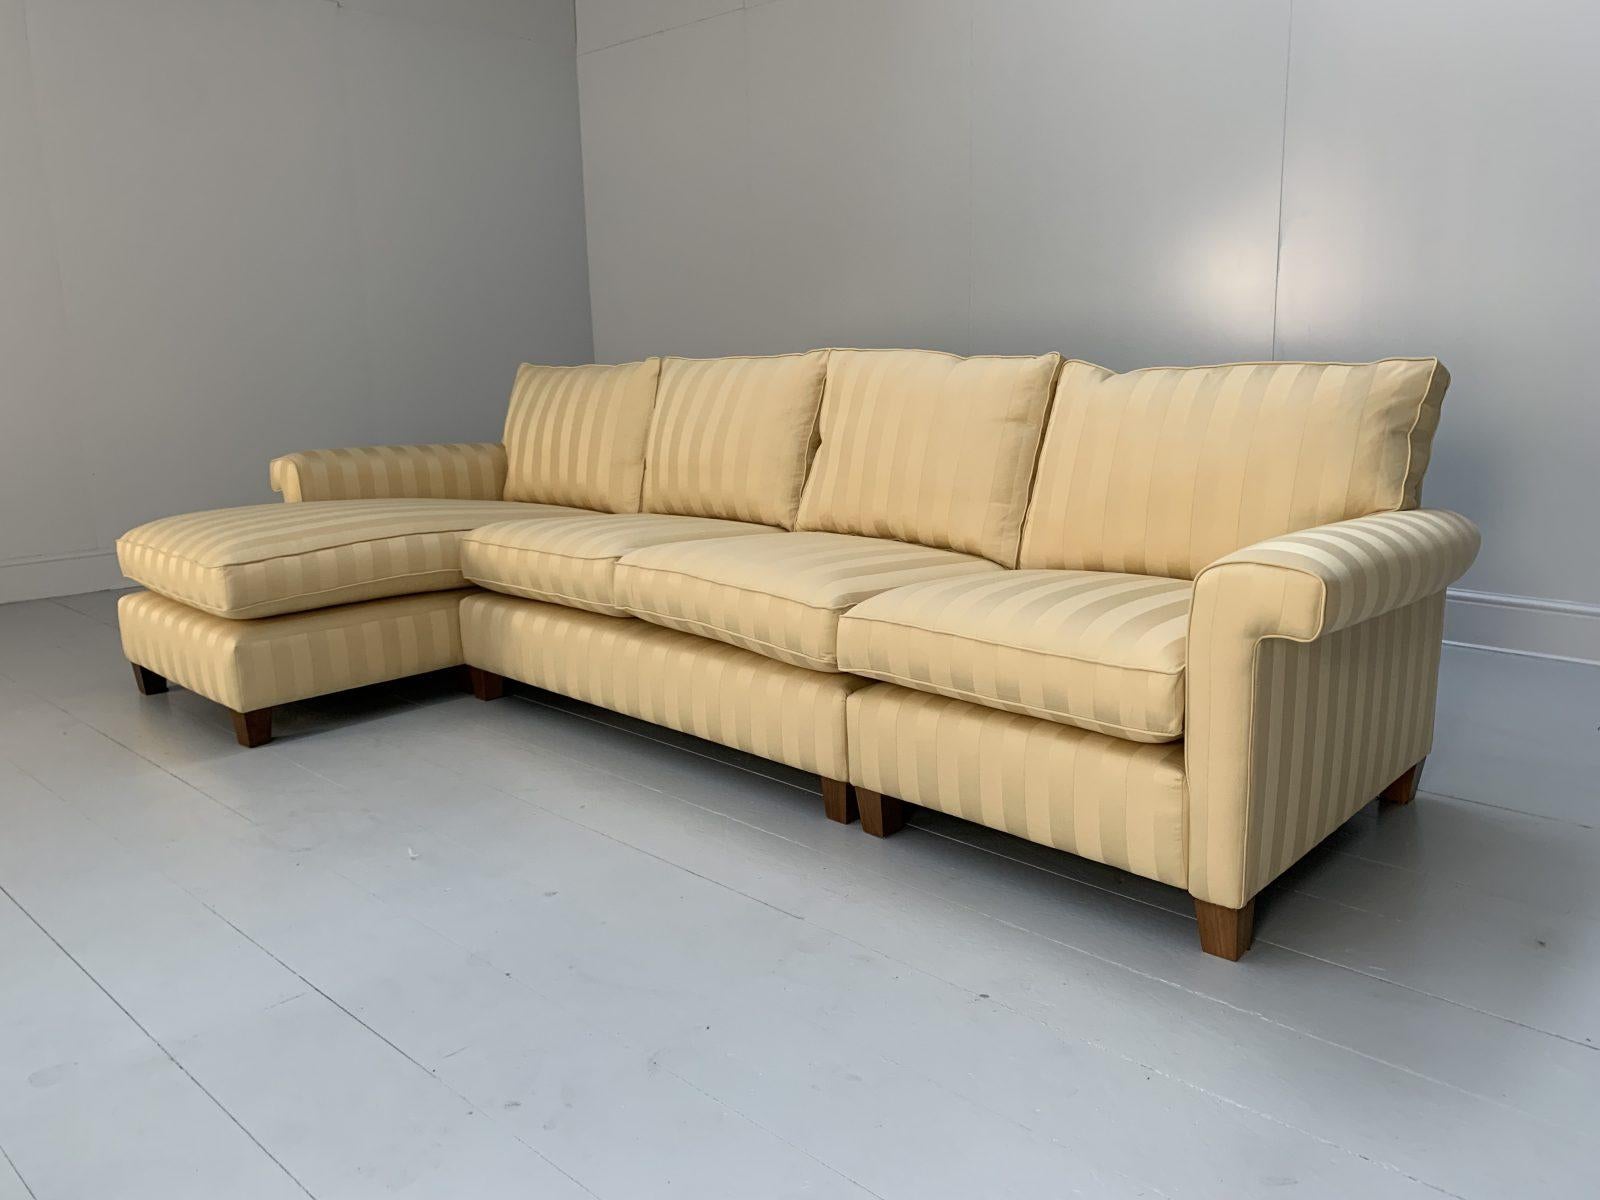 Contemporary Duresta “Haywood” 4-Seat L-Shape Sofa – In Gold Stripe Fabric For Sale